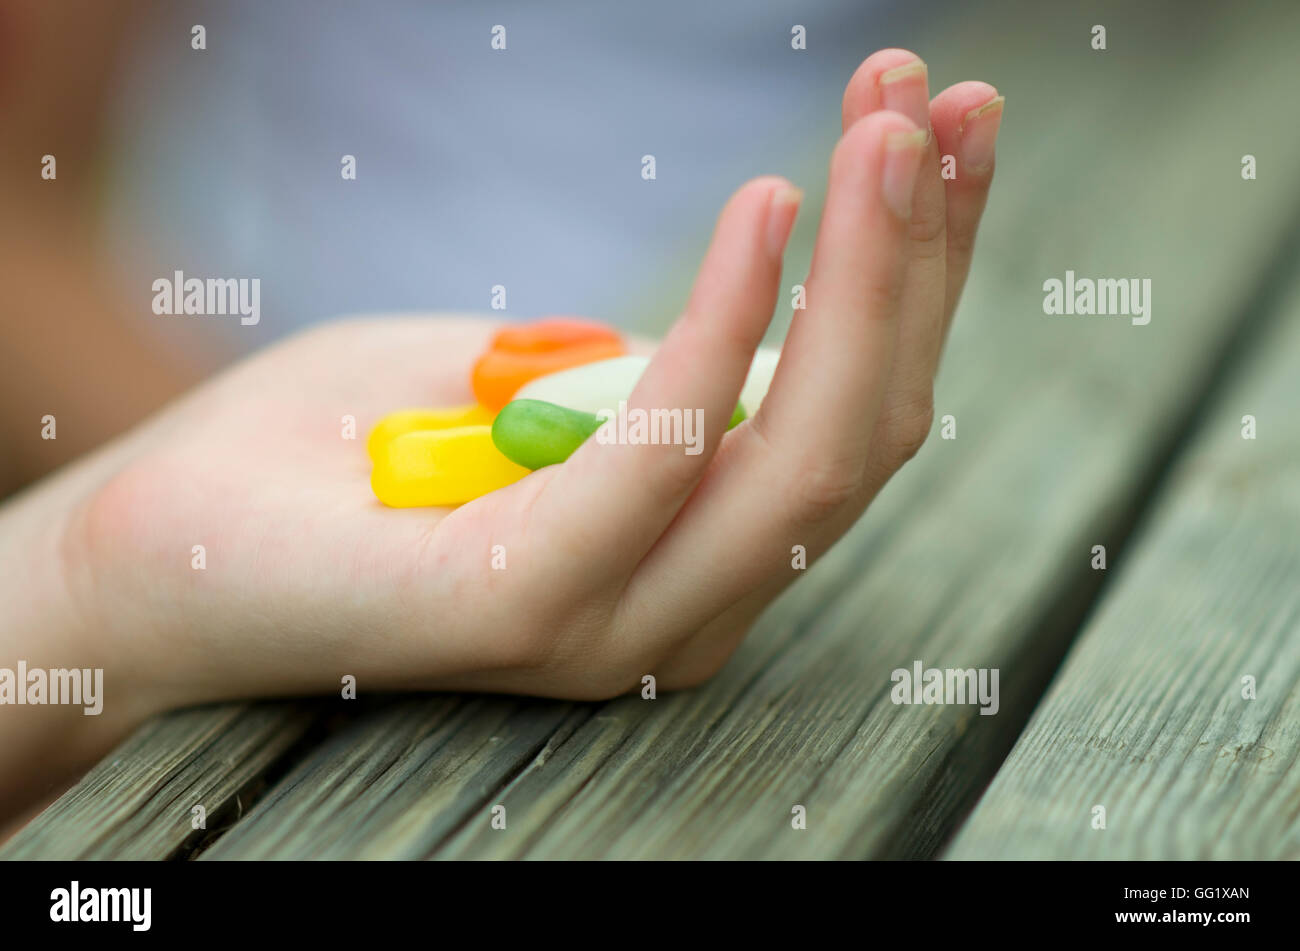 Colourful jelly beans in a cupped hand. Stock Photo